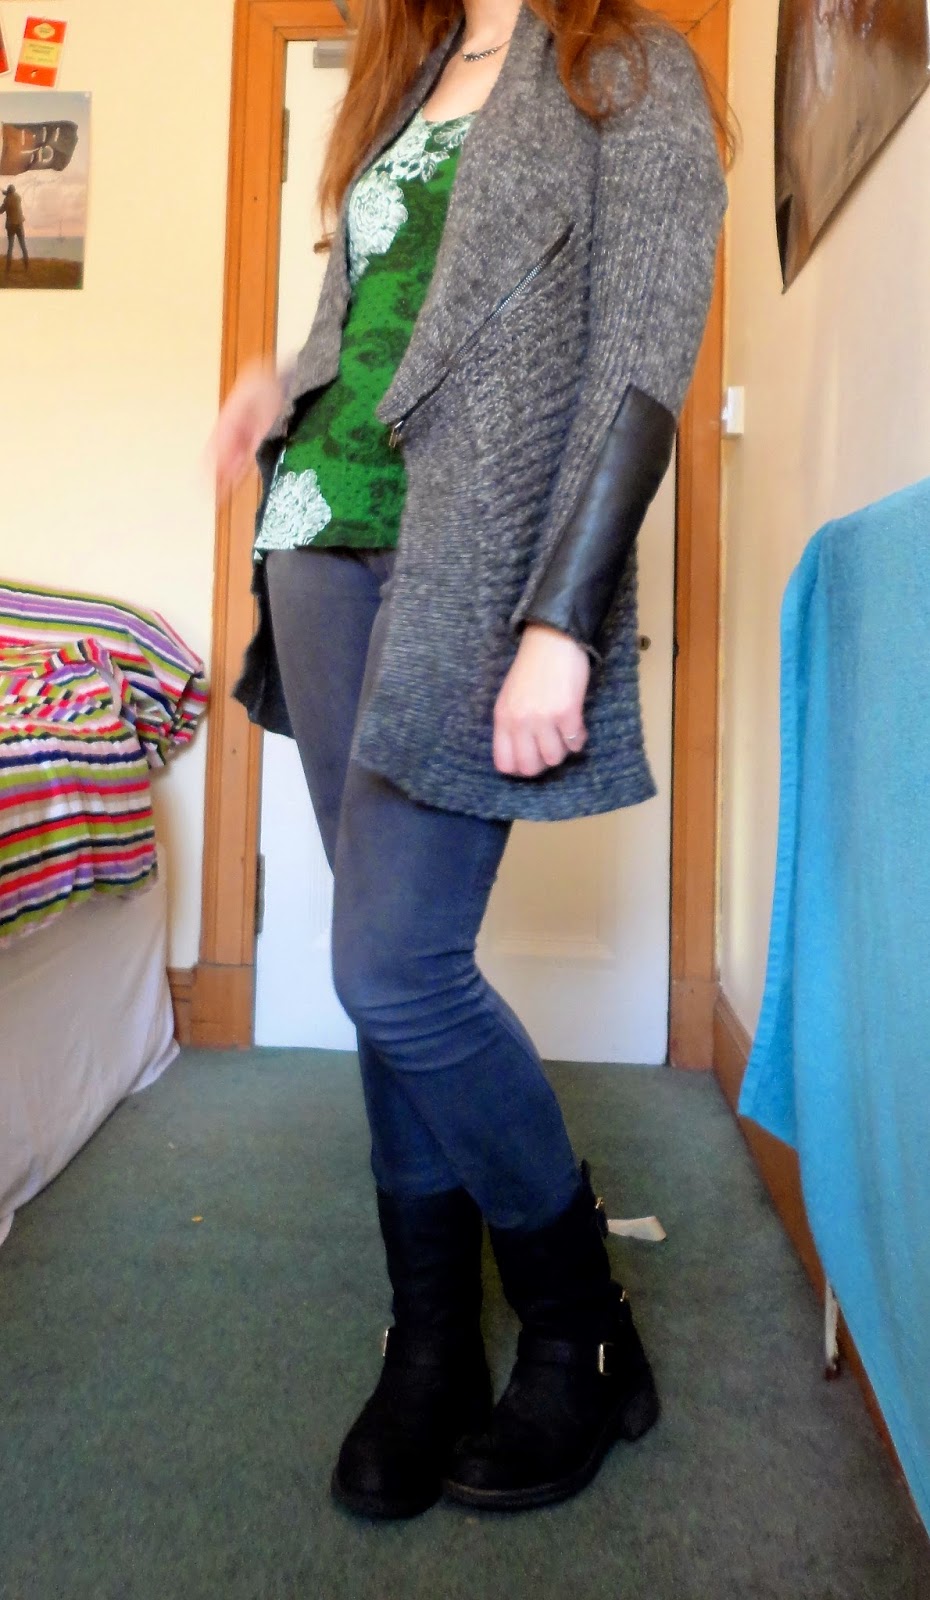 Winter outfit of grey cardigan, green top, jeans and boots